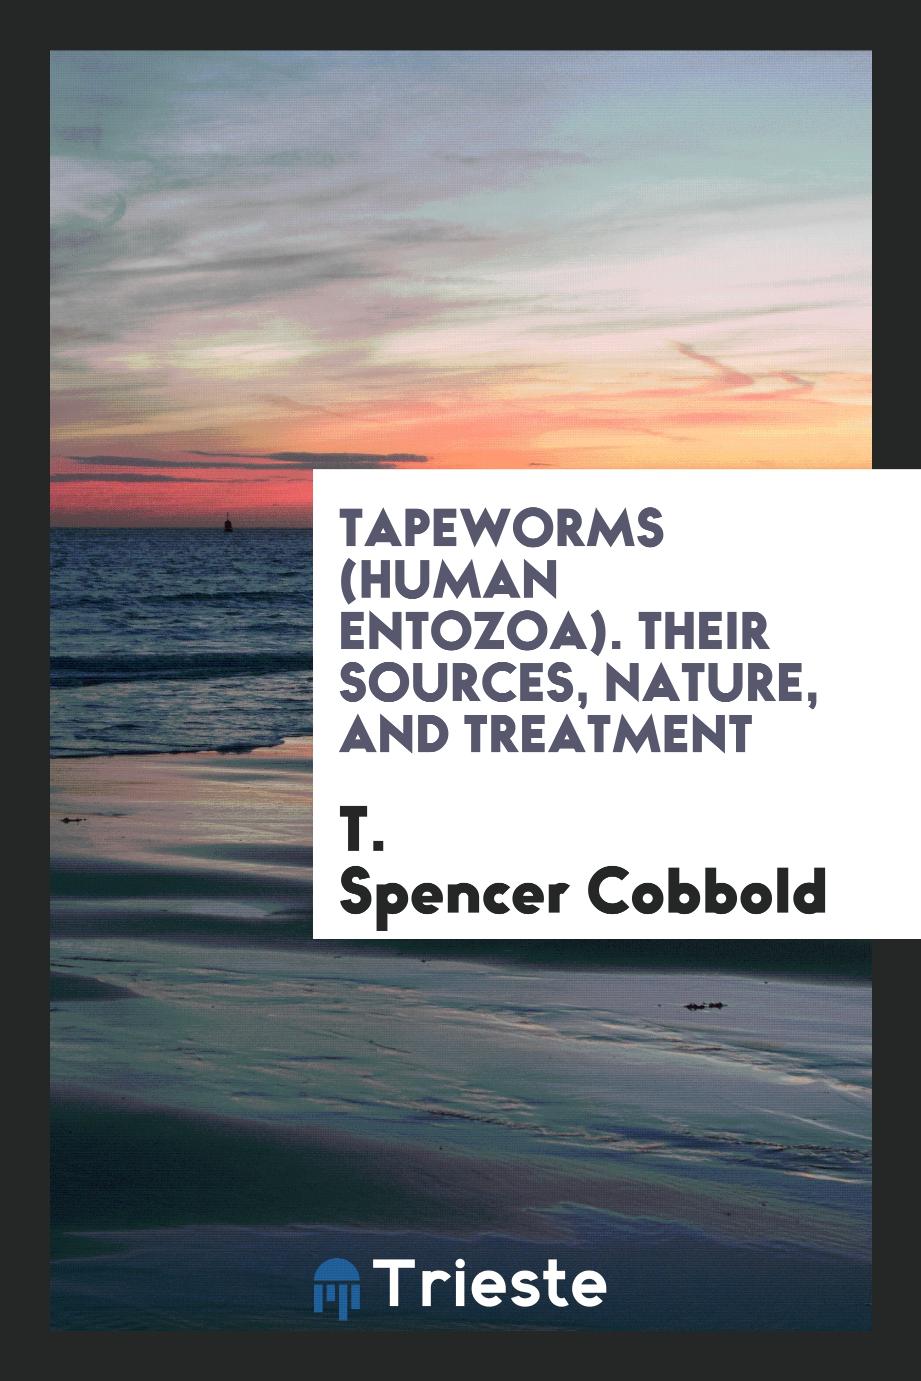 Tapeworms (Human Entozoa). Their Sources, Nature, and Treatment